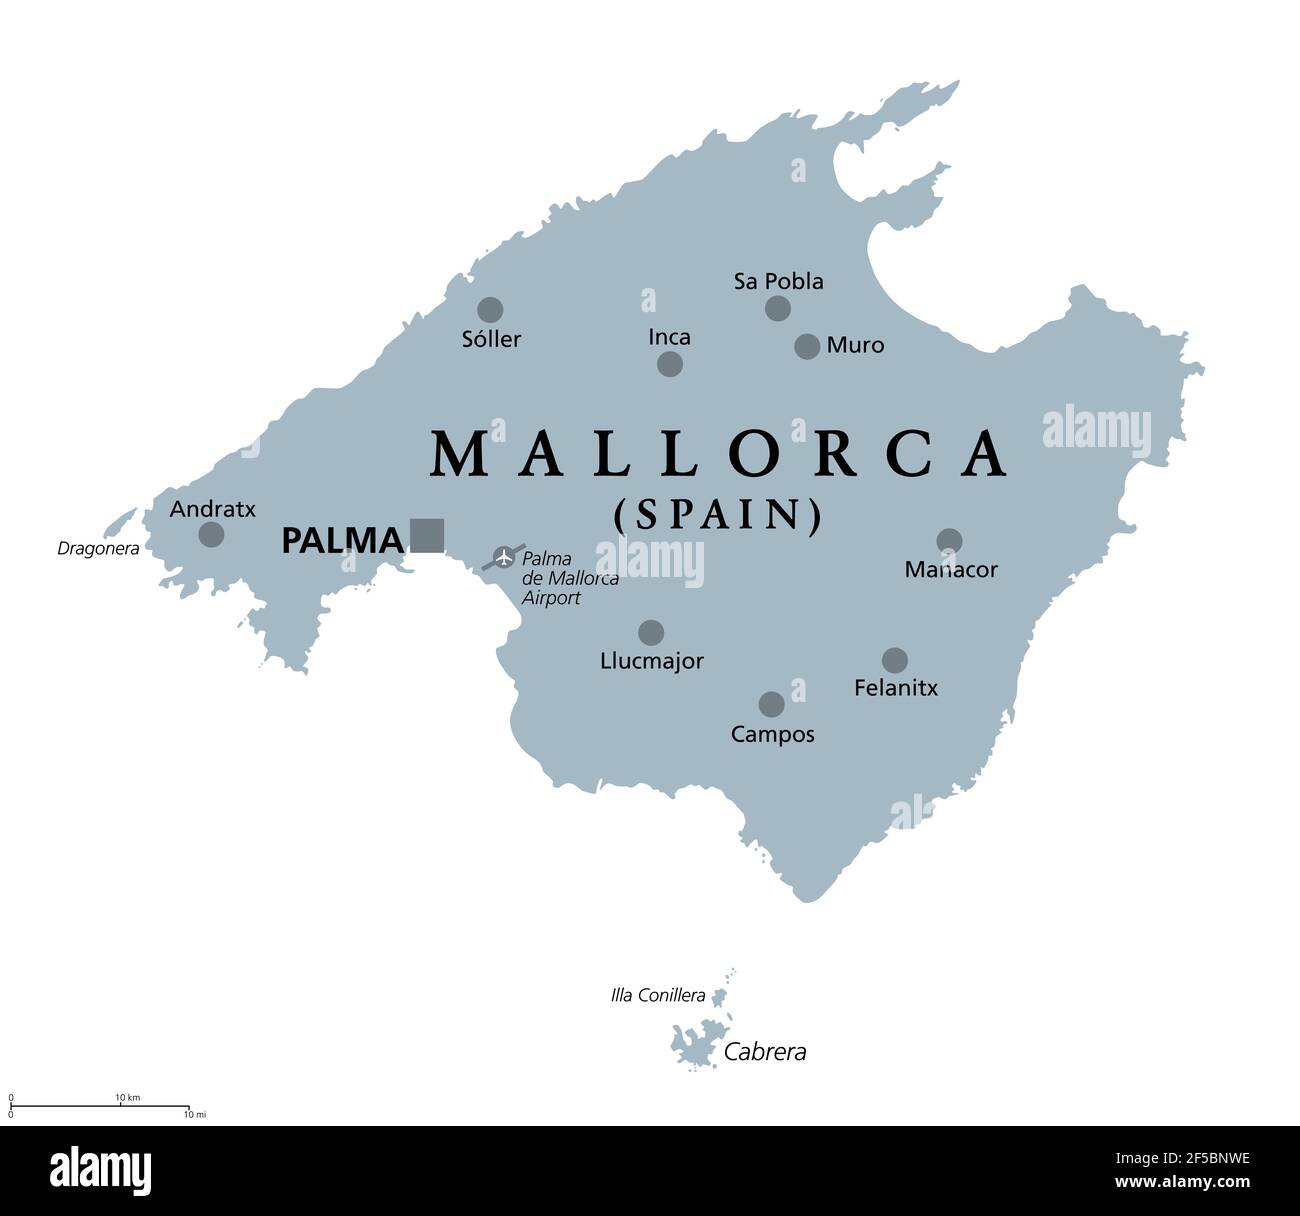 Mallorca, gray political map, with capital Palma and important towns. Majorca, largest Island of autonomous community of the Balearic Islands, Spain. Stock Photo